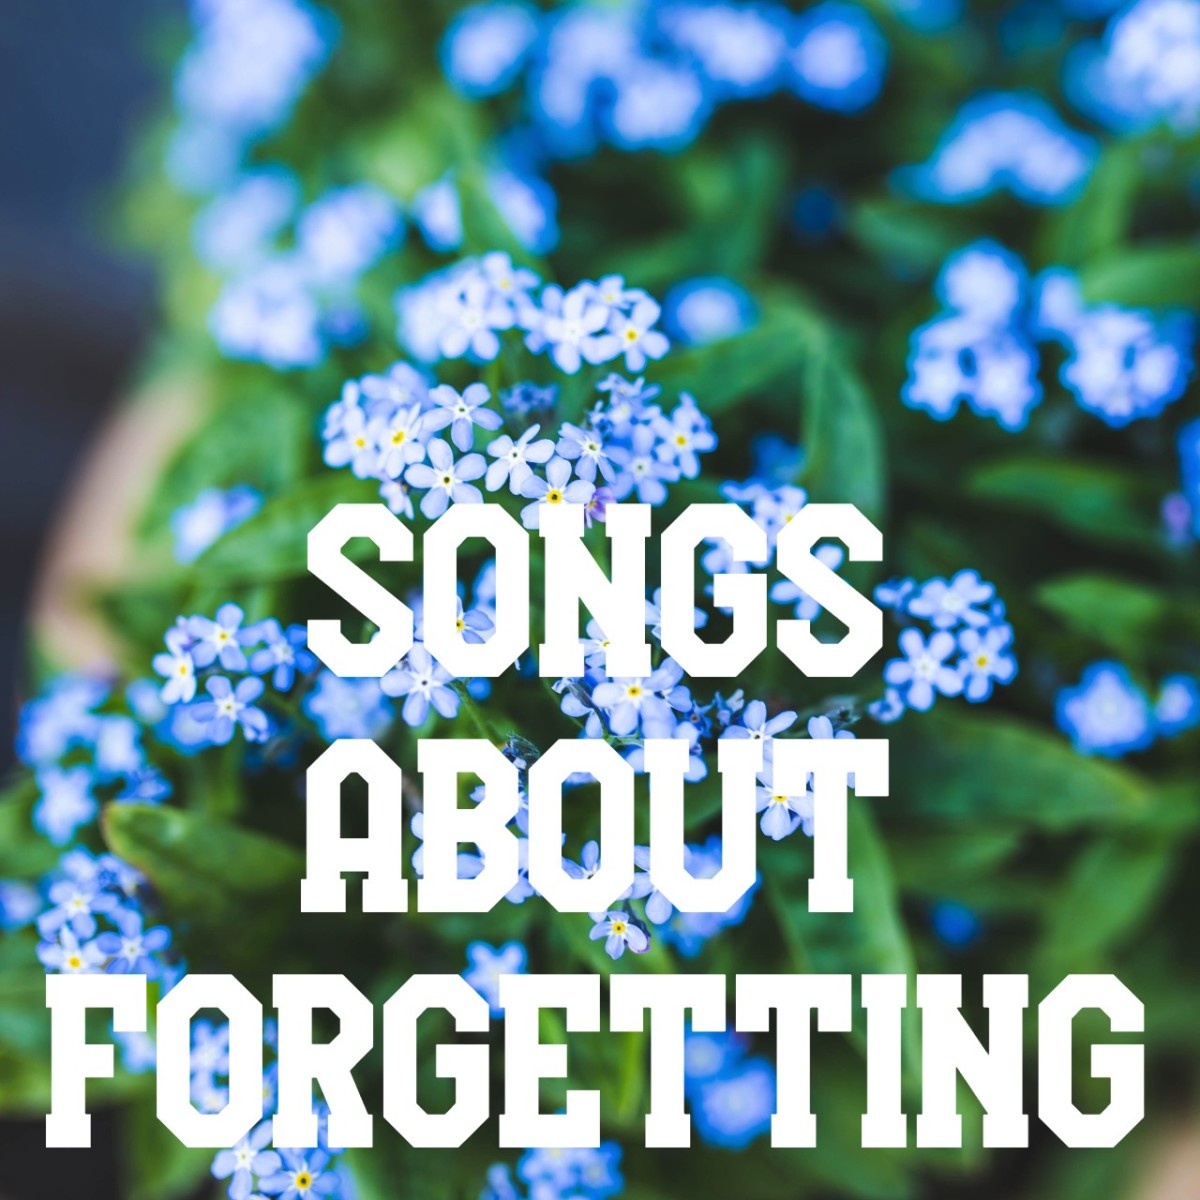 60 Songs About Forgetting